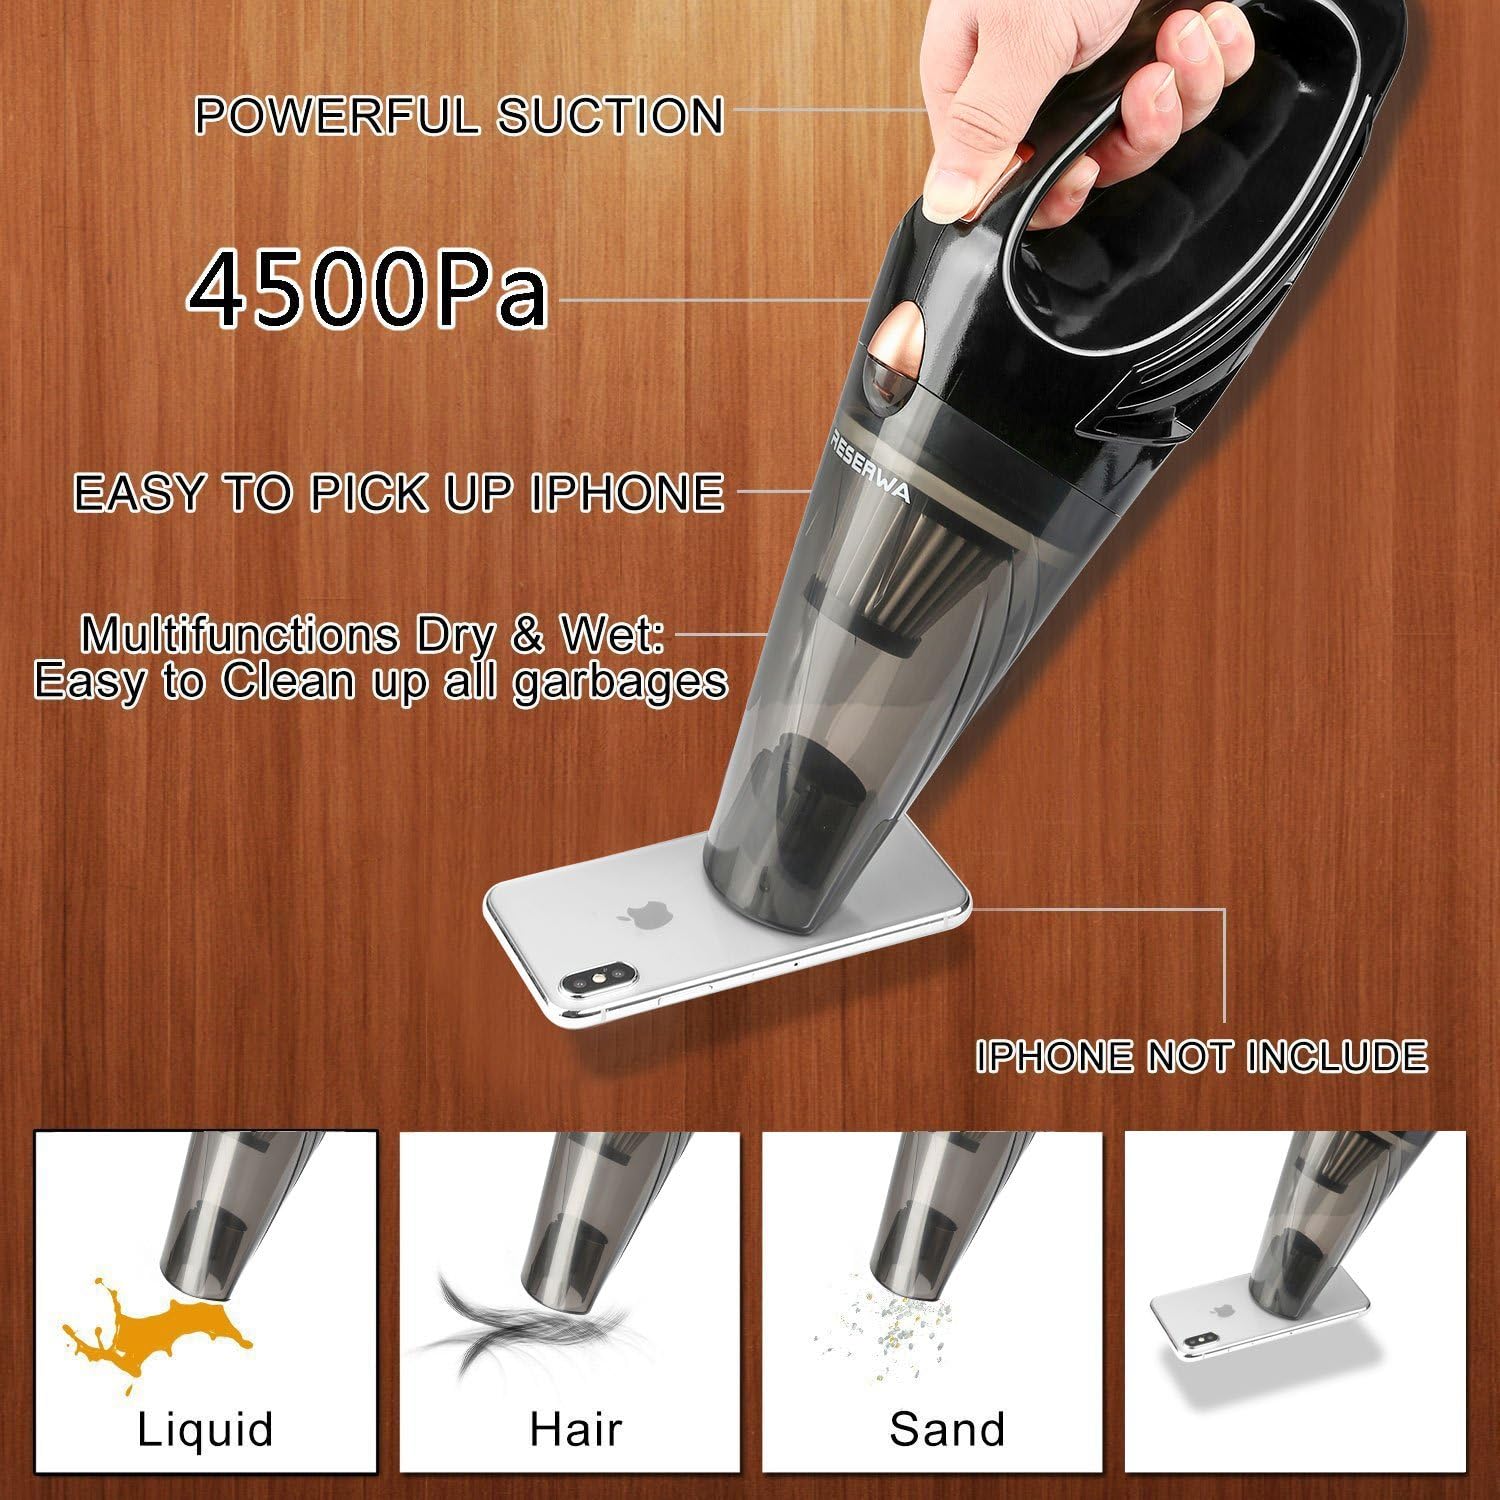 Reserwa [5th Gen] Car Vacuum 12V 106W Car Vacuum Cleaner 4500PA Much Stronger Suction Potable Handheld Auto Vacuum Cleaner with 16.4FT(